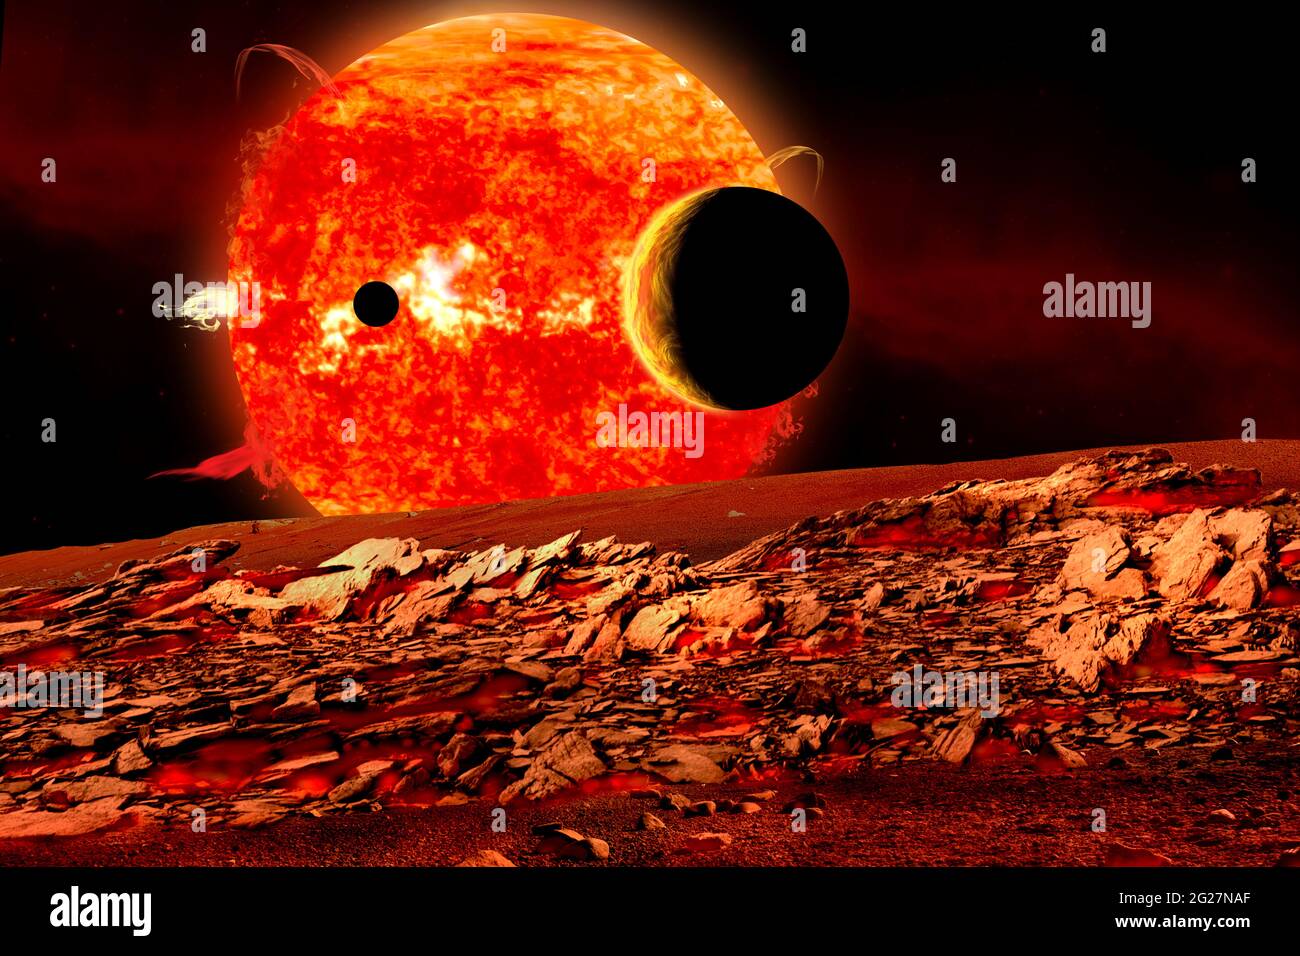 Planets are silhouetted as they transit in front of a red giant star. Stock Photo